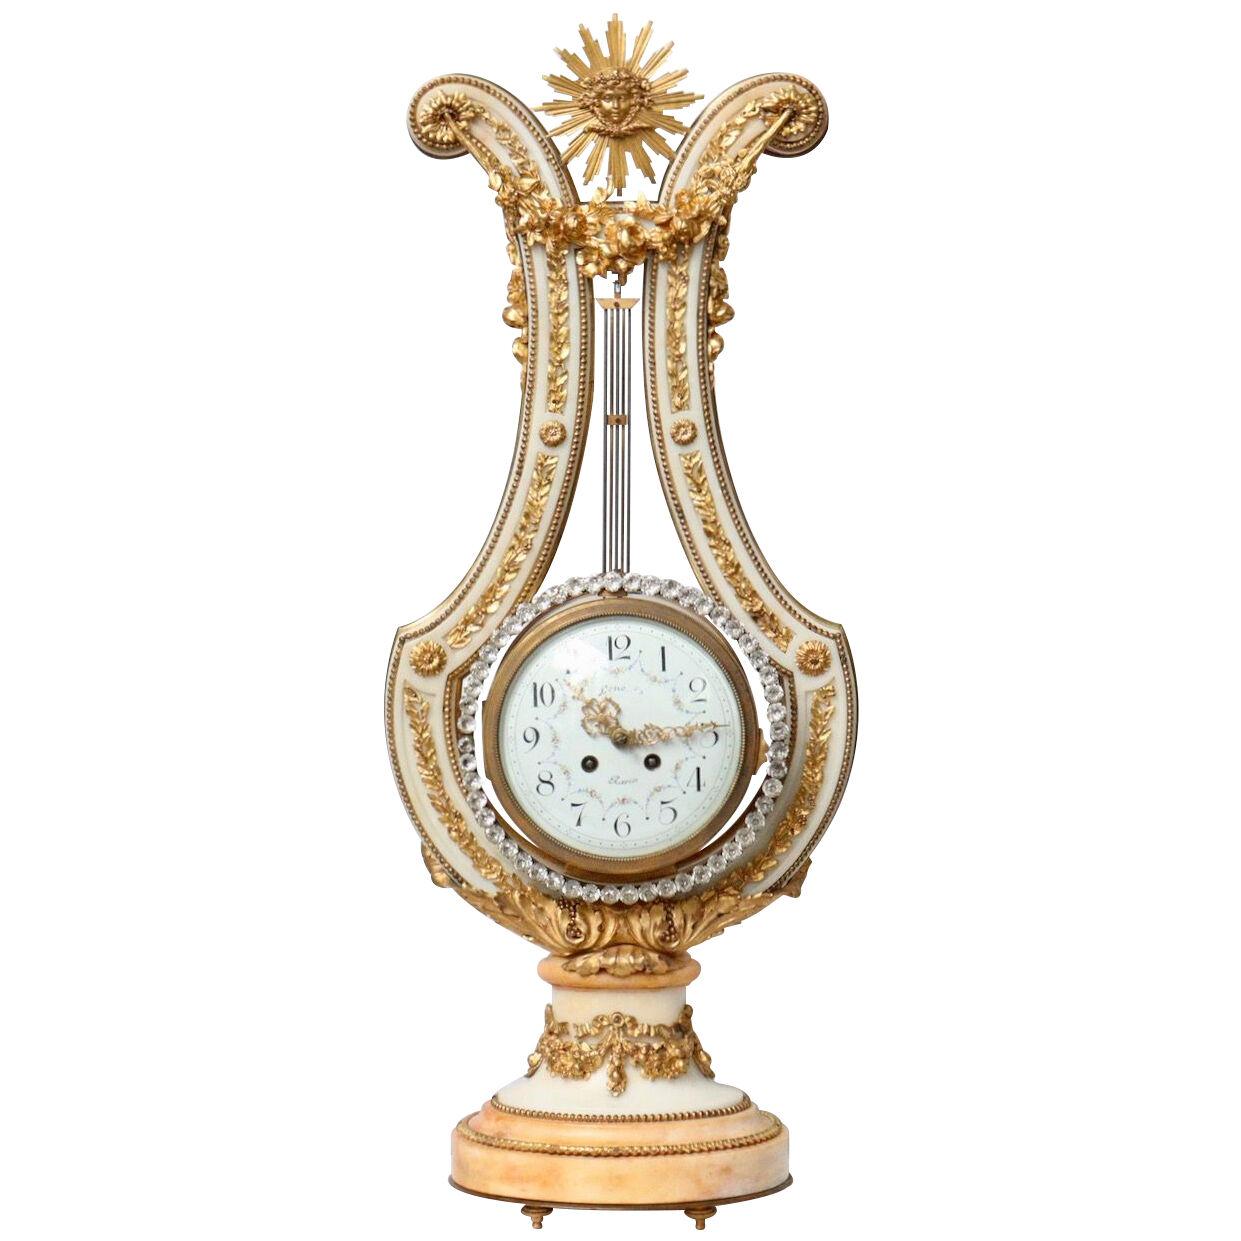 A Very Impressive French 19th Century Neoclassical Lyre-Form Clock  